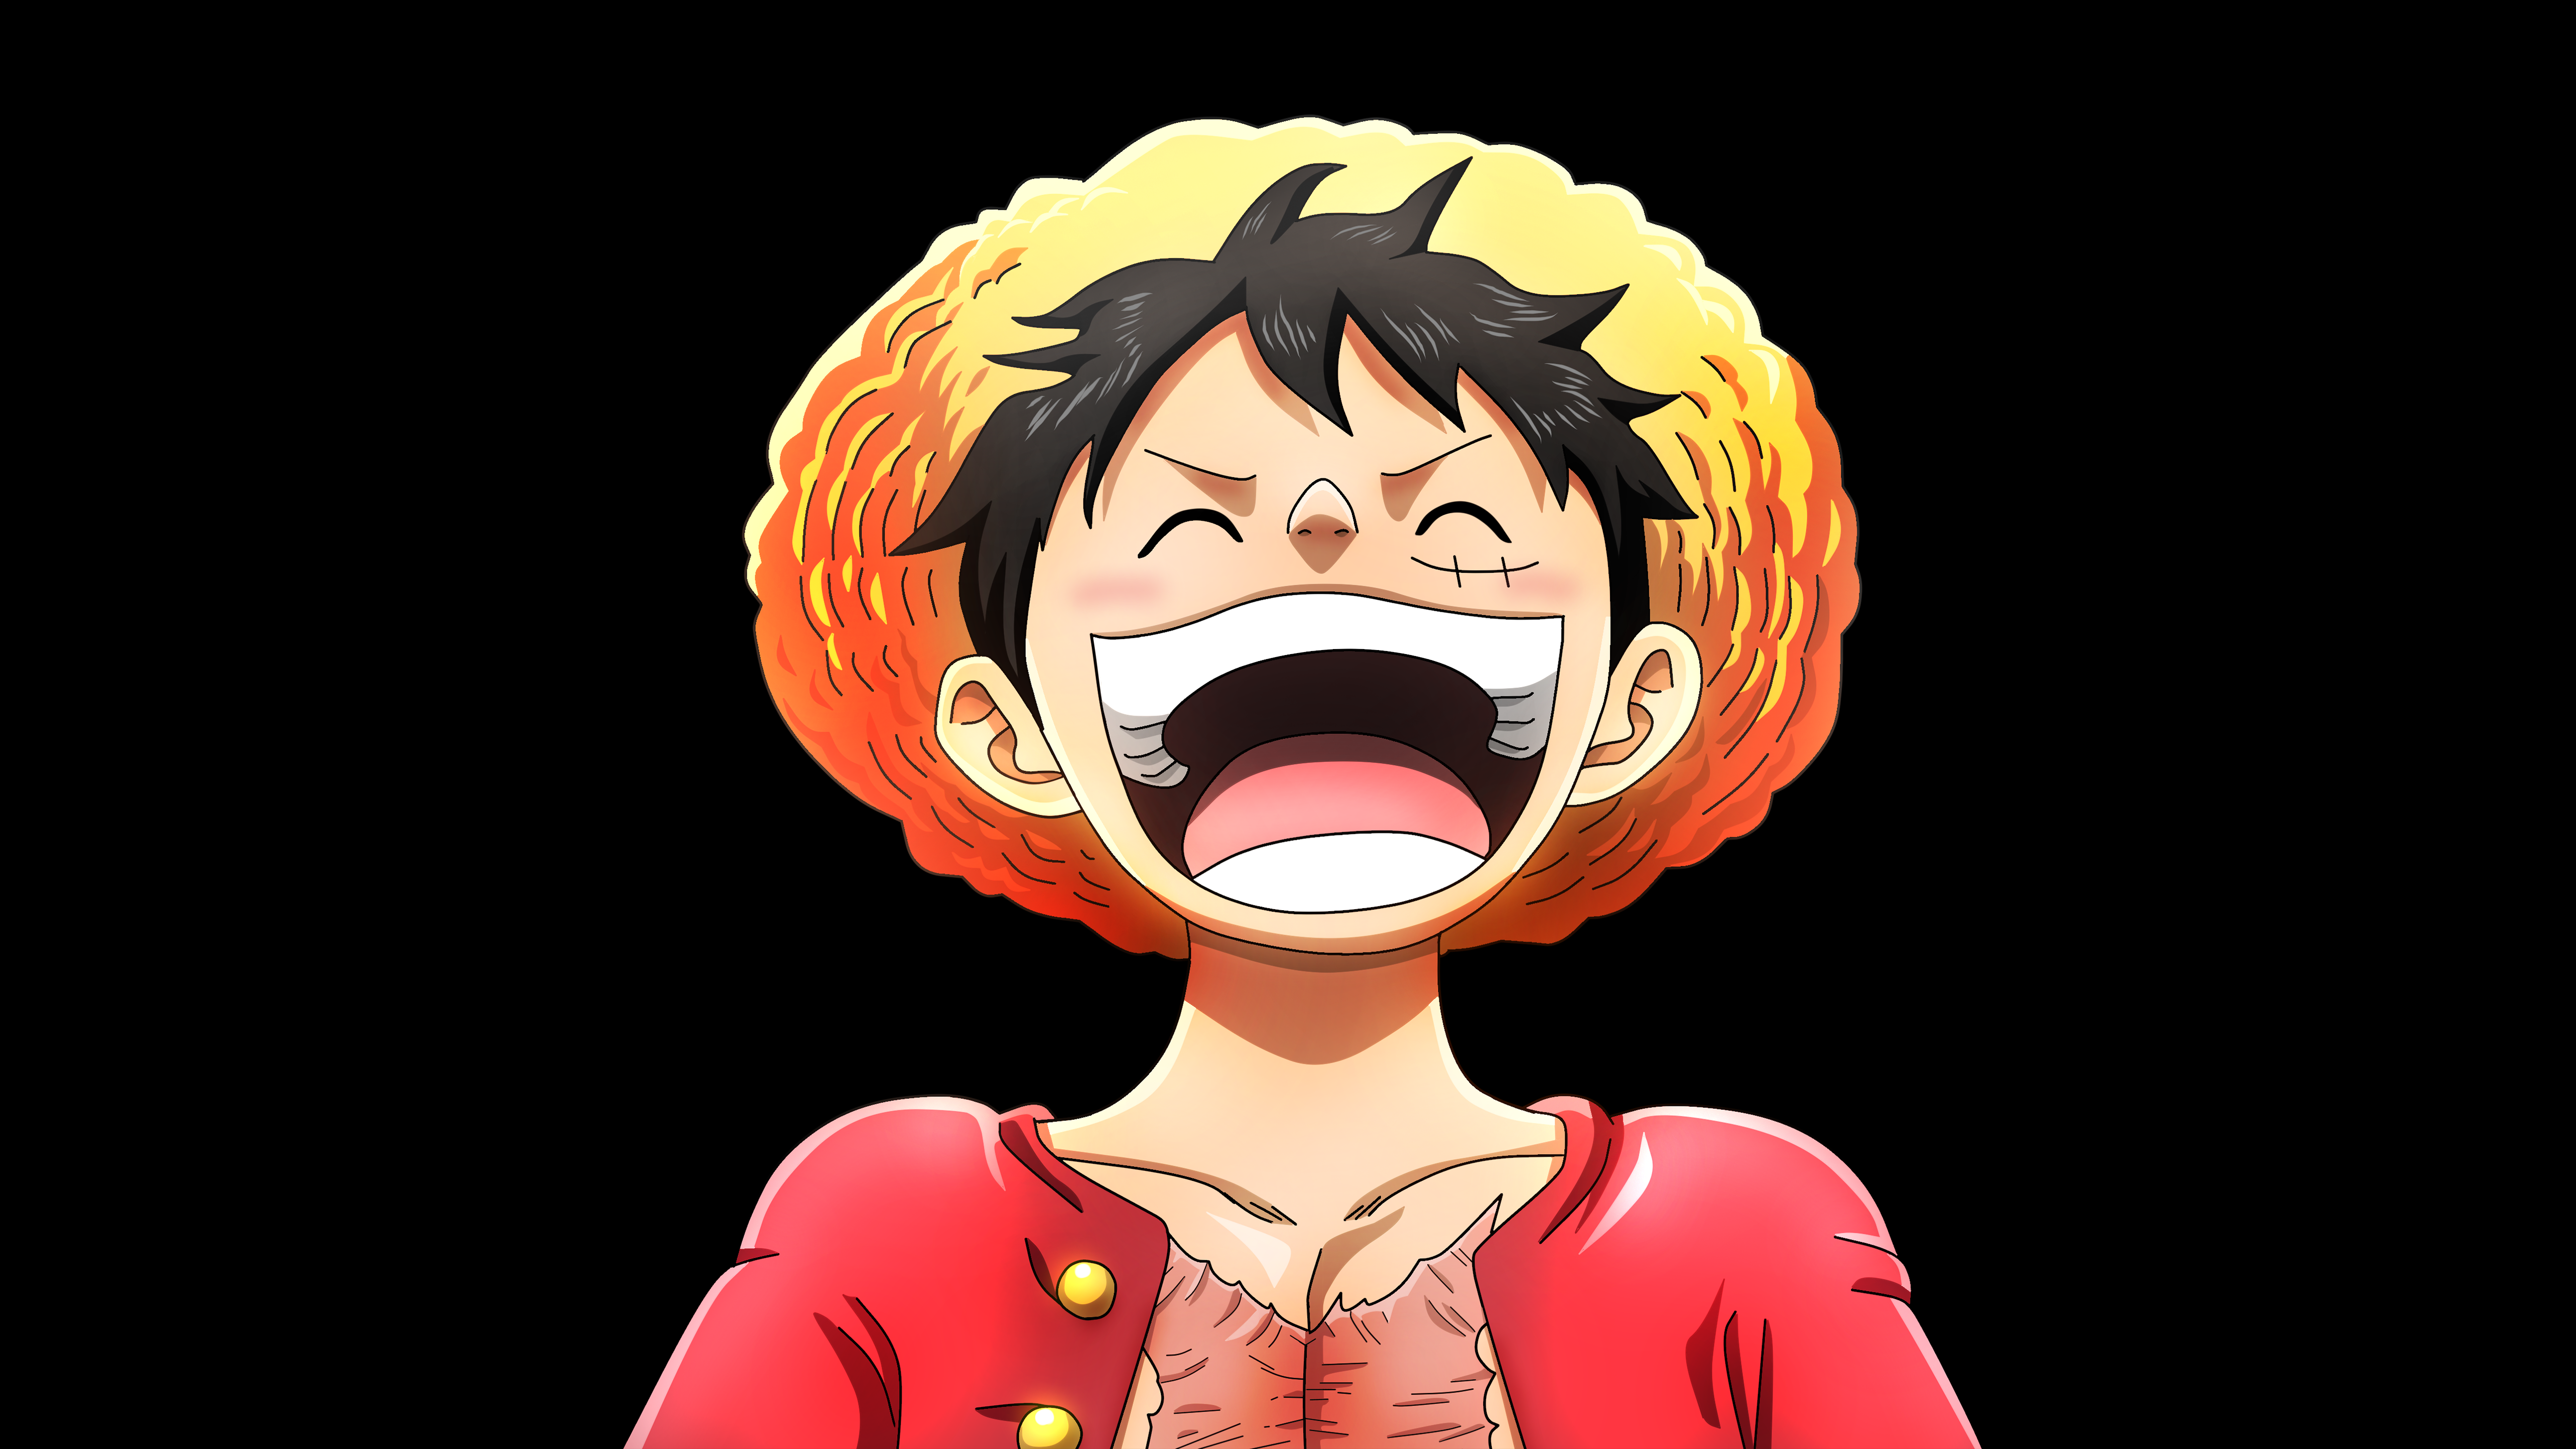 One Piece-Luffy Gear 5 Live Wallpaper - MyLiveWallpapers.com